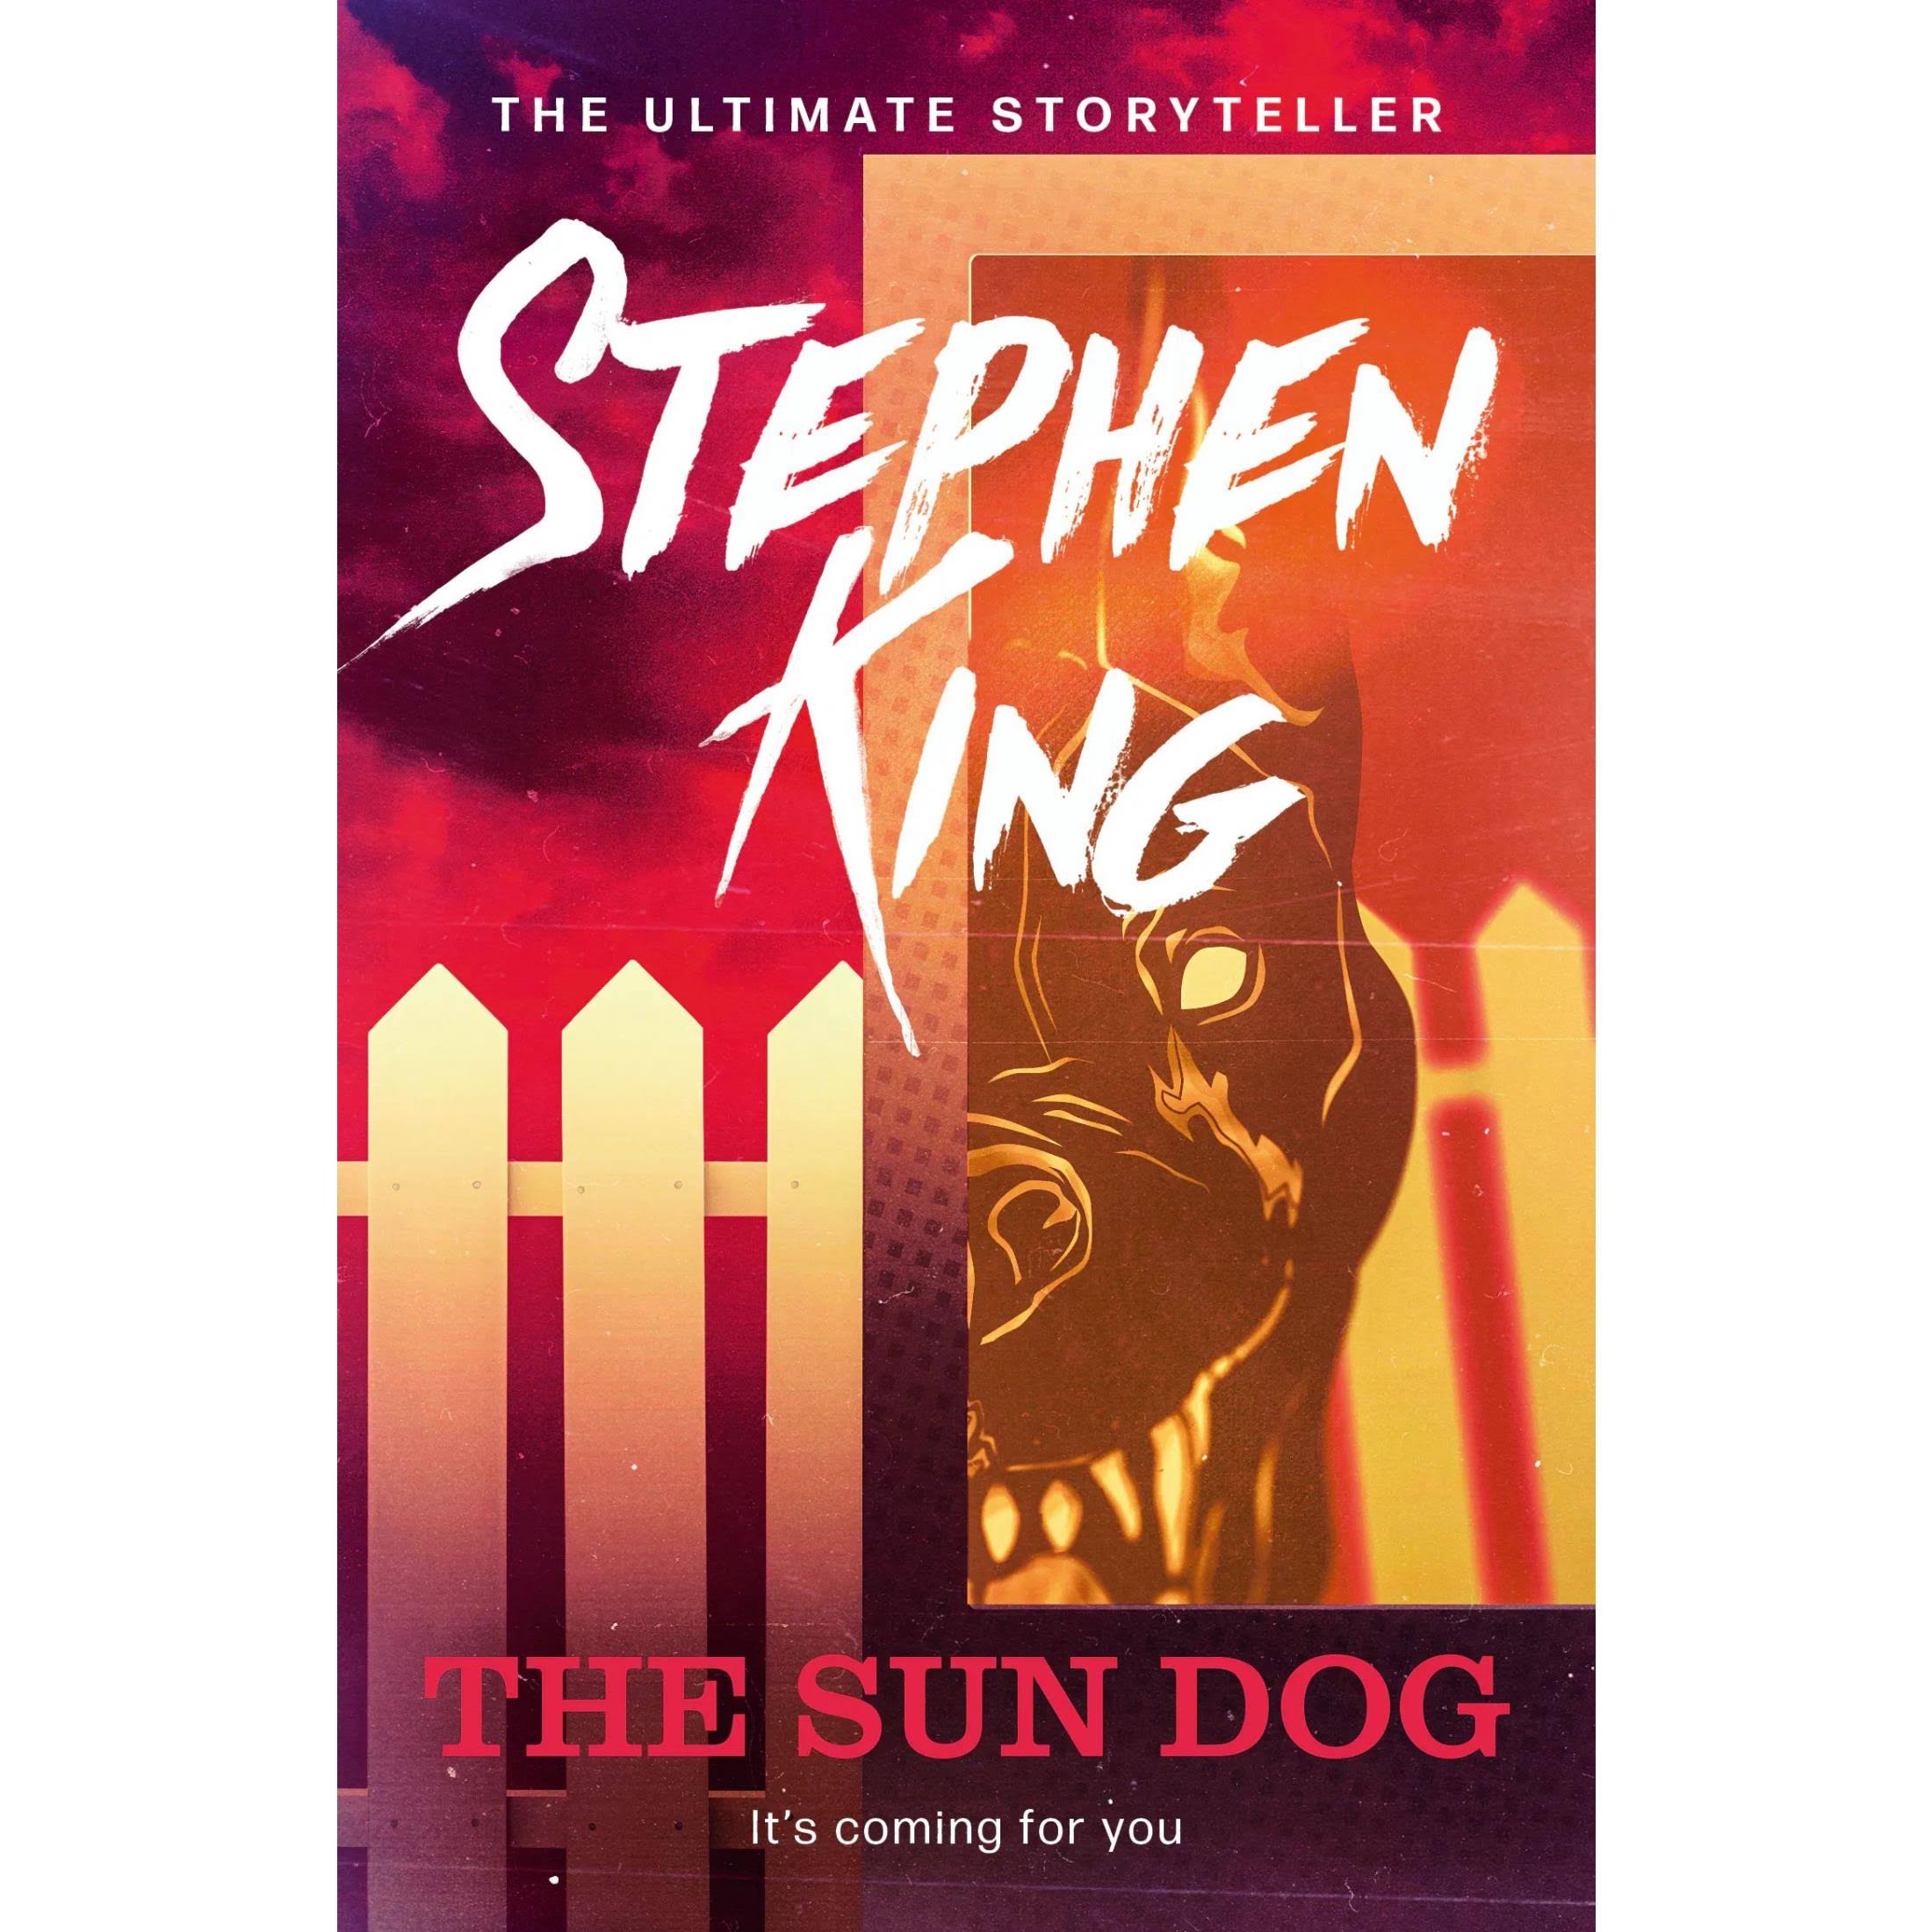 The Sun Dog by Stephen King